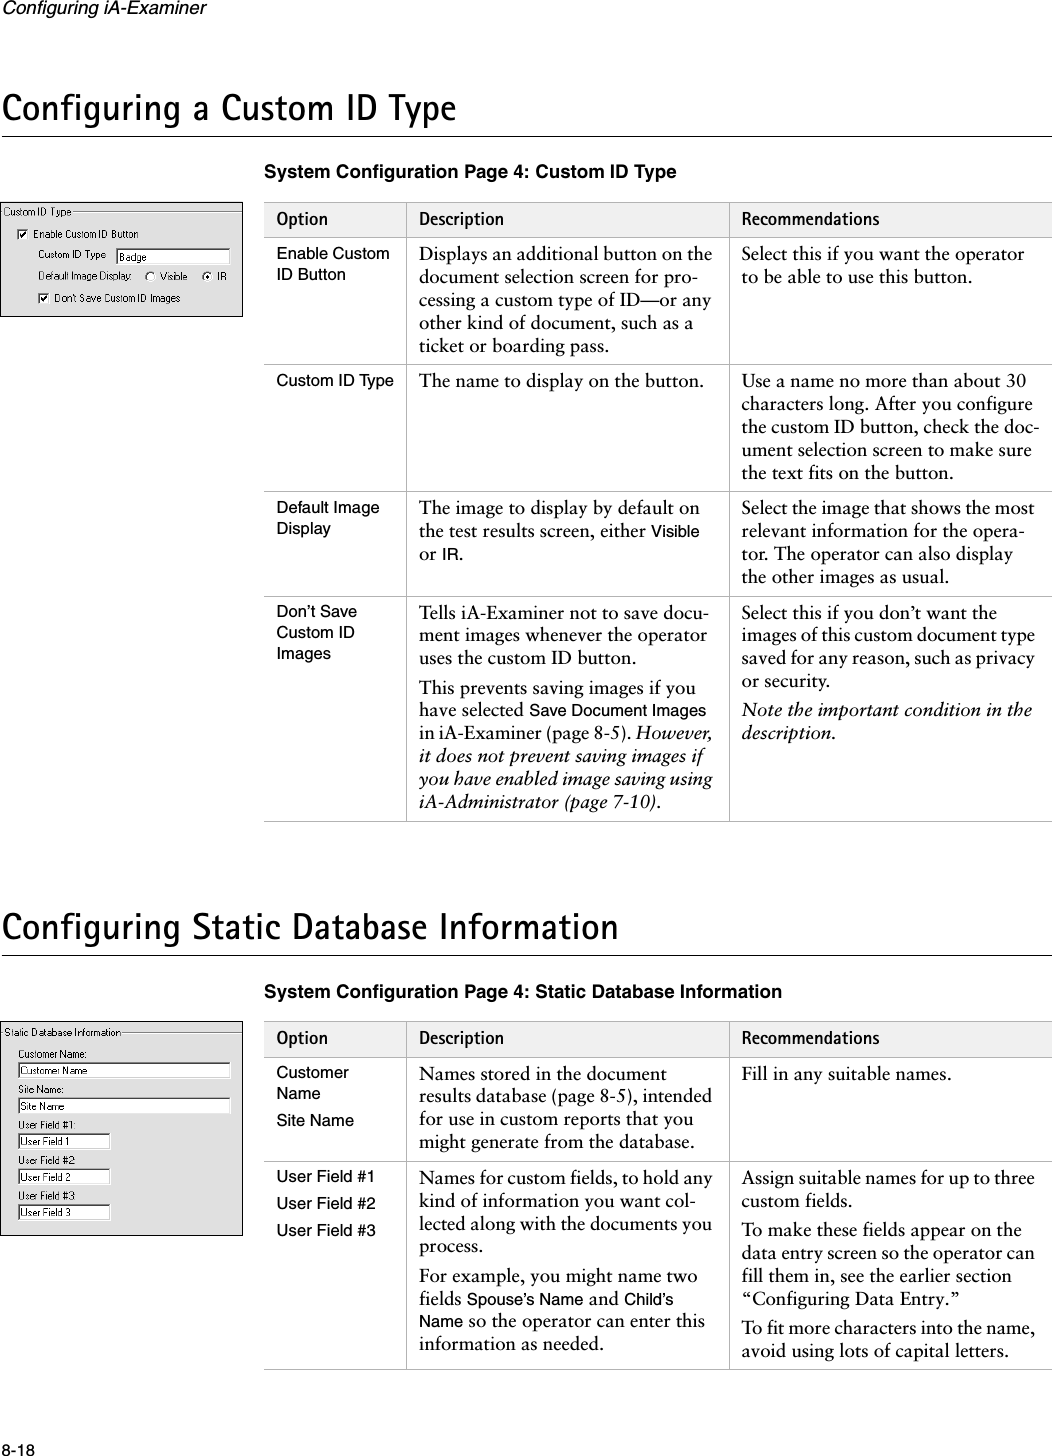 Configuring iA-Examiner8-18Configuring a Custom ID TypeSystem Configuration Page 4: Custom ID TypeConfiguring Static Database InformationSystem Configuration Page 4: Static Database InformationOption Description RecommendationsEnable Custom ID ButtonDisplays an additional button on the document selection screen for pro-cessing a custom type of ID—or any other kind of document, such as a ticket or boarding pass.Select this if you want the operator to be able to use this button.Custom ID Type The name to display on the button. Use a name no more than about 30 characters long. After you configure the custom ID button, check the doc-ument selection screen to make sure the text fits on the button.Default Image DisplayThe image to display by default on the test results screen, either Visible or IR.Select the image that shows the most relevant information for the opera-tor. The operator can also display the other images as usual.Don’t Save Custom ID ImagesTells iA-Examiner not to save docu-ment images whenever the operator uses the custom ID button.This prevents saving images if you have selected Save Document Images in iA-Examiner (page 8-5). However, it does not prevent saving images if you have enabled image saving using iA-Administrator (page 7-10).Select this if you don’t want the images of this custom document type saved for any reason, such as privacy or security.Note the important condition in the description.Option Description RecommendationsCustomer NameSite NameNames stored in the document results database (page 8-5), intended for use in custom reports that you might generate from the database.Fill in any suitable names.User Field #1User Field #2User Field #3Names for custom fields, to hold any kind of information you want col-lected along with the documents you process.For example, you might name two fields Spouse’s Name and Child’s Name so the operator can enter this information as needed.Assign suitable names for up to three custom fields.To make these fields appear on the data entry screen so the operator can fill them in, see the earlier section “Configuring Data Entry.”To fit more characters into the name, avoid using lots of capital letters.